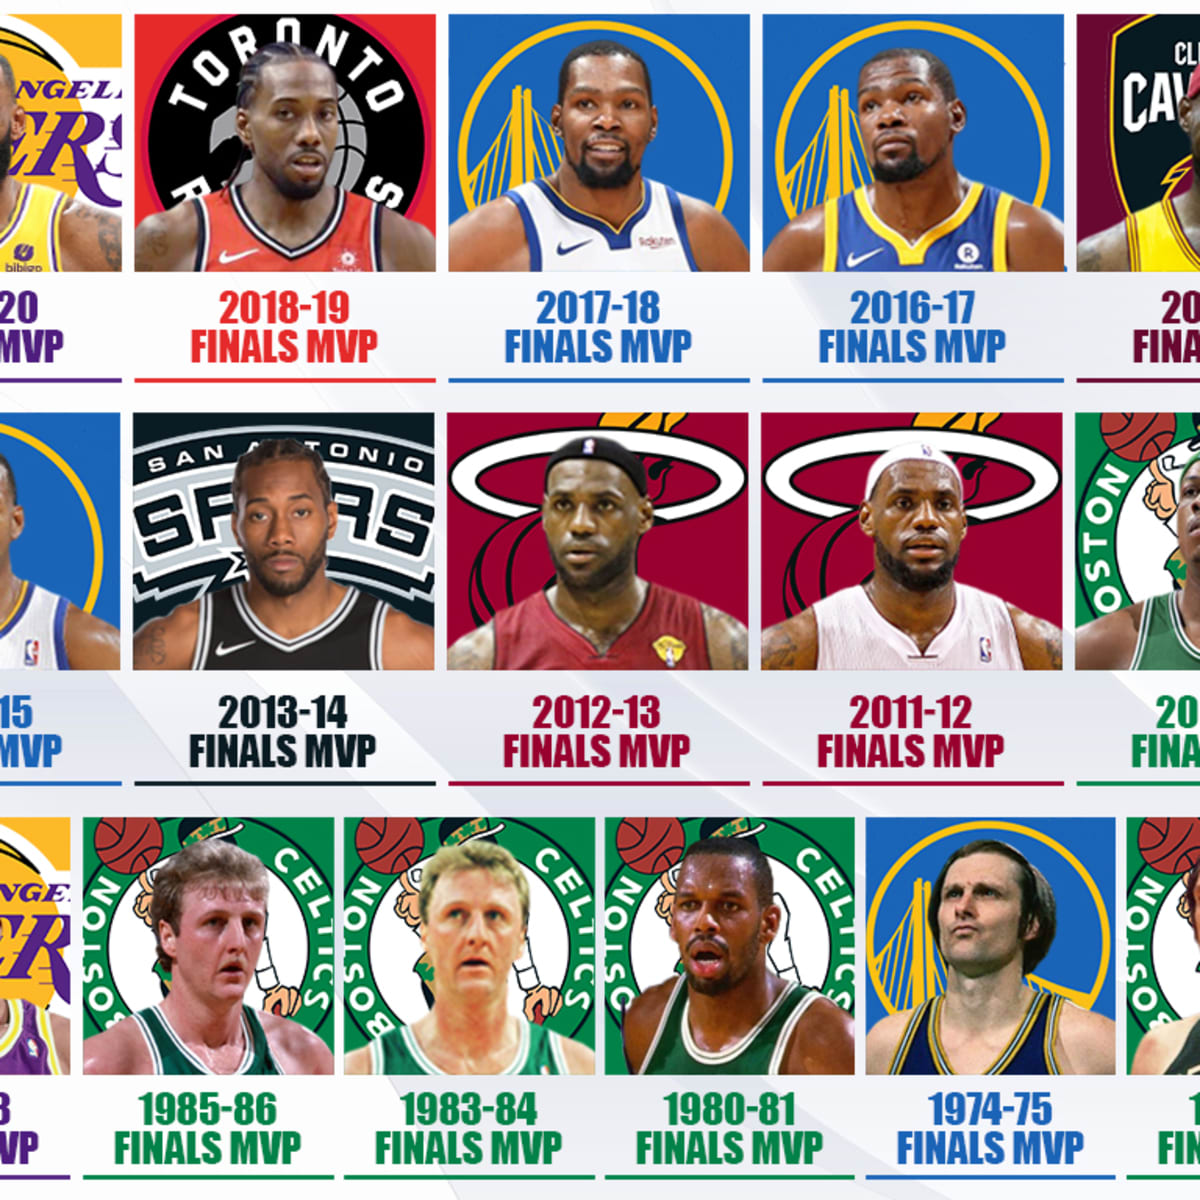 NBA Finals MVP Award Winners From 1981 To 1990: Lakers And Celtics Stars  Won 7 Out Of 10 Finals MVP Awards - Fadeaway World